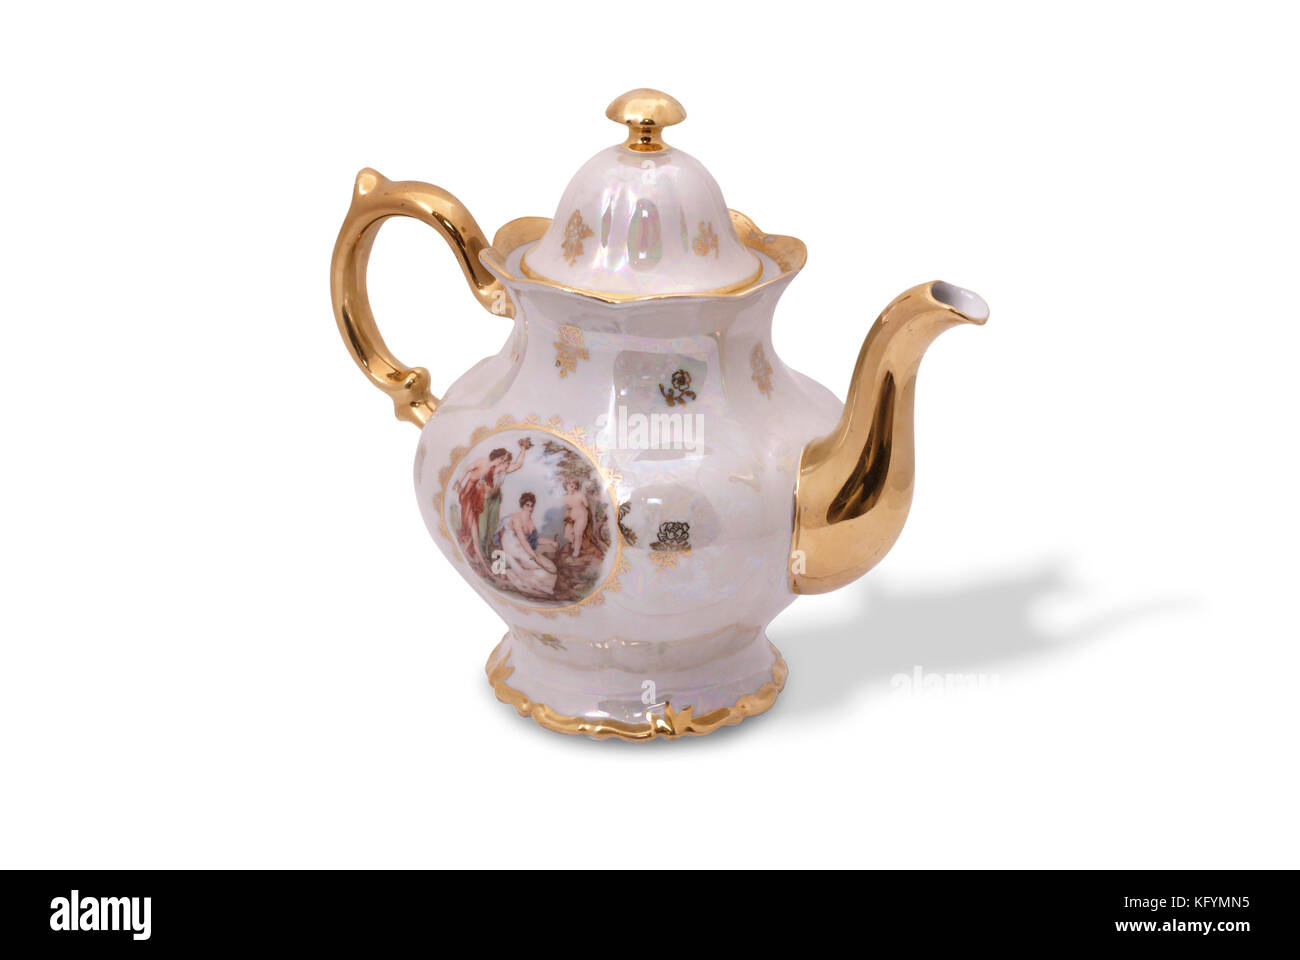 Teapot from German famous porcelain tea service (Madonna). East Germany. Stock Photo